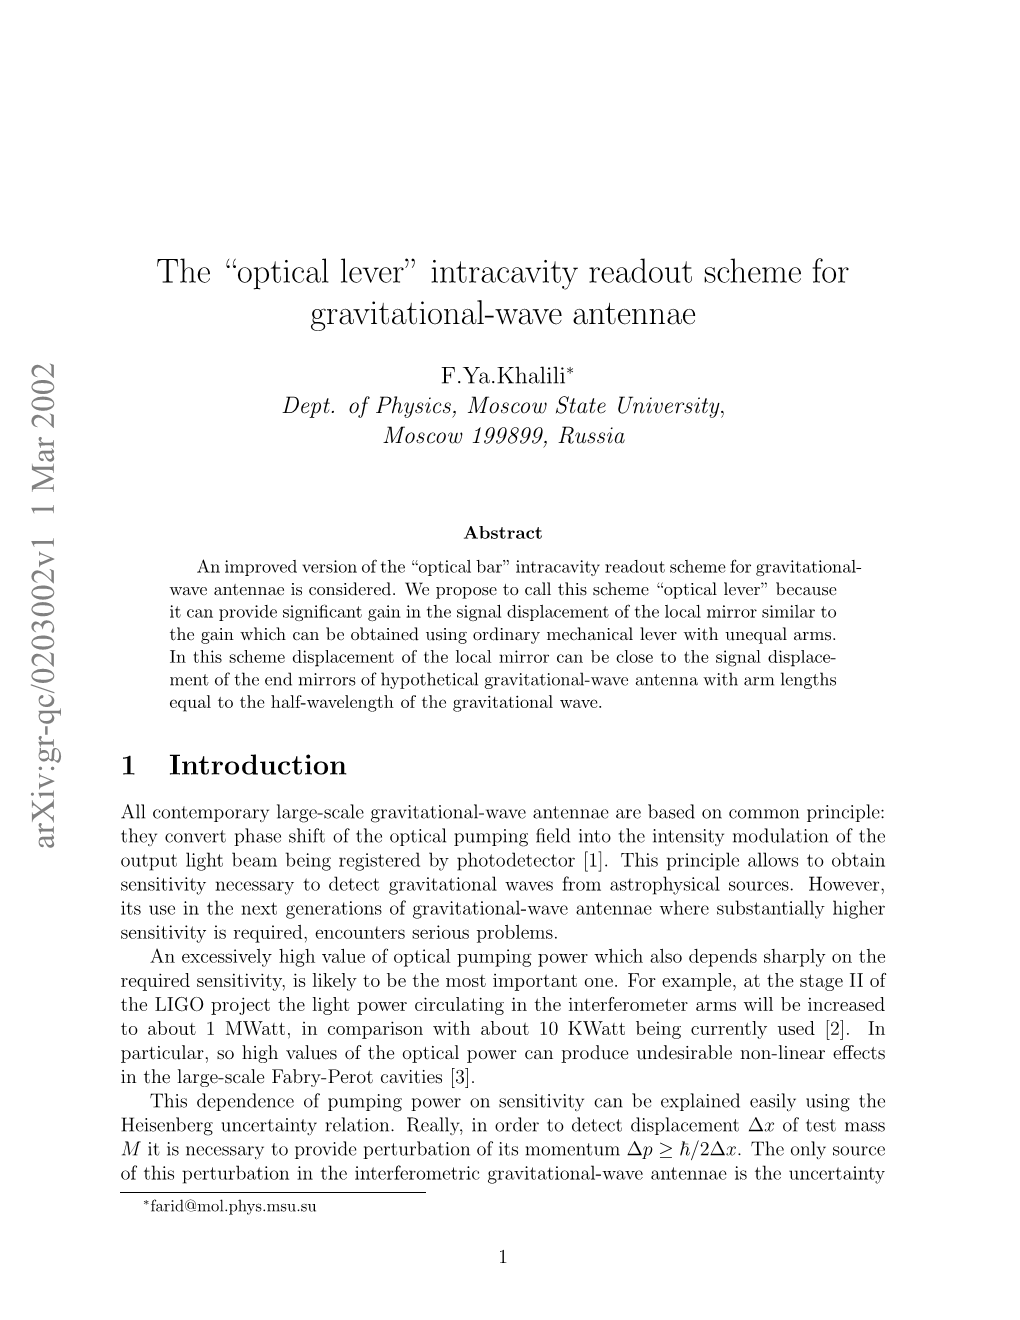 The" Optical Lever" Intracavity Readout Scheme for Gravitational-Wave